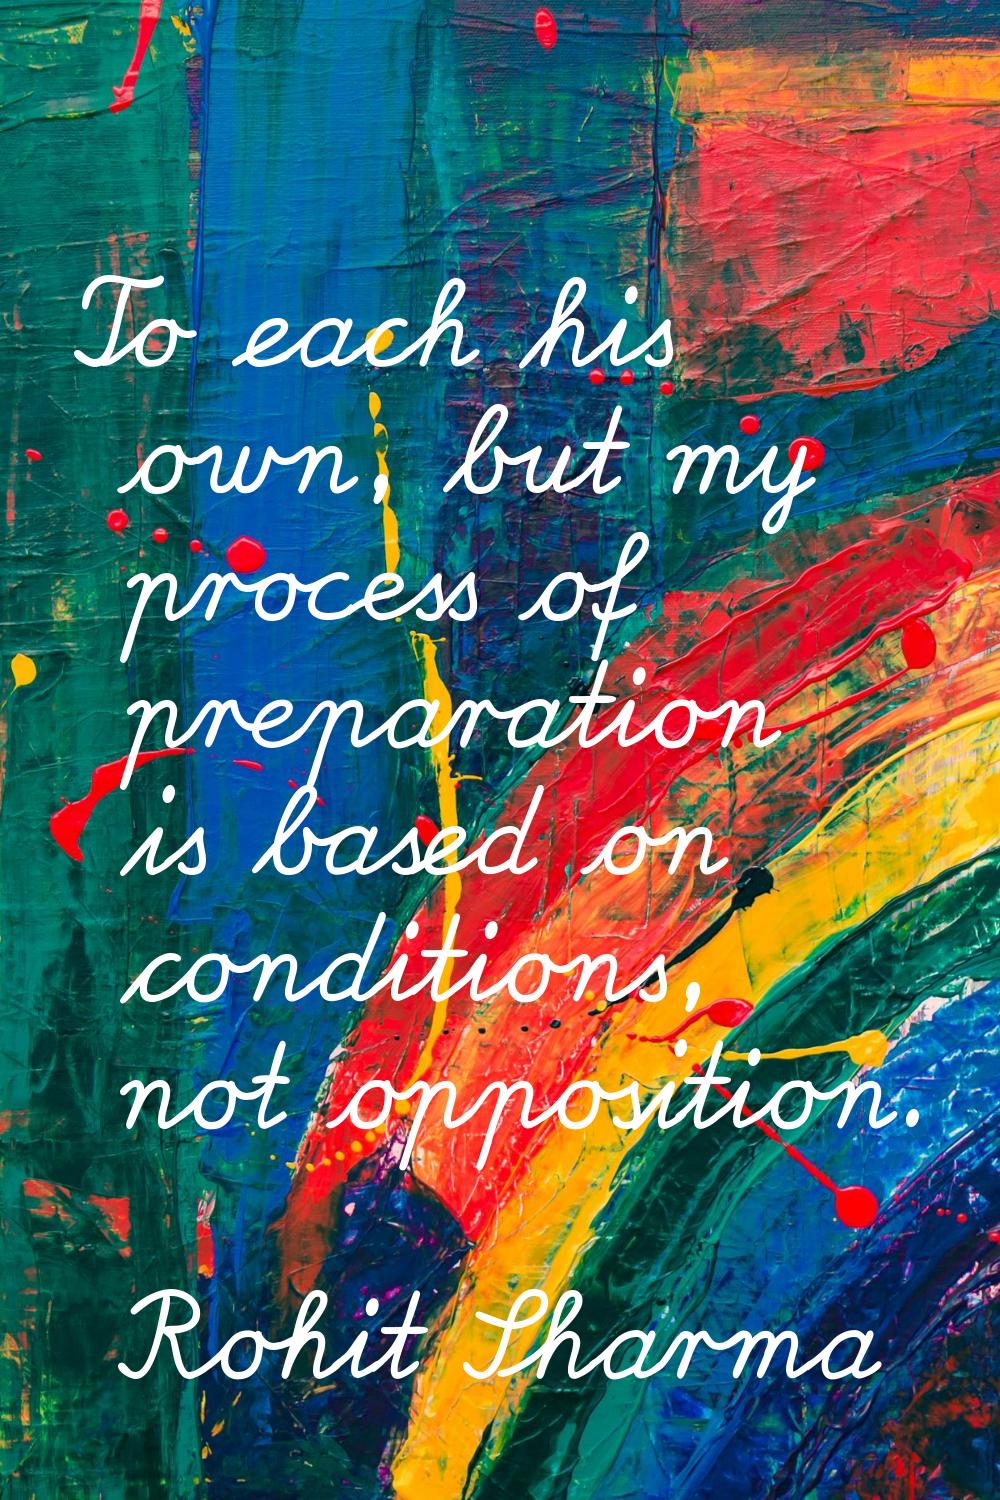 To each his own, but my process of preparation is based on conditions, not opposition.